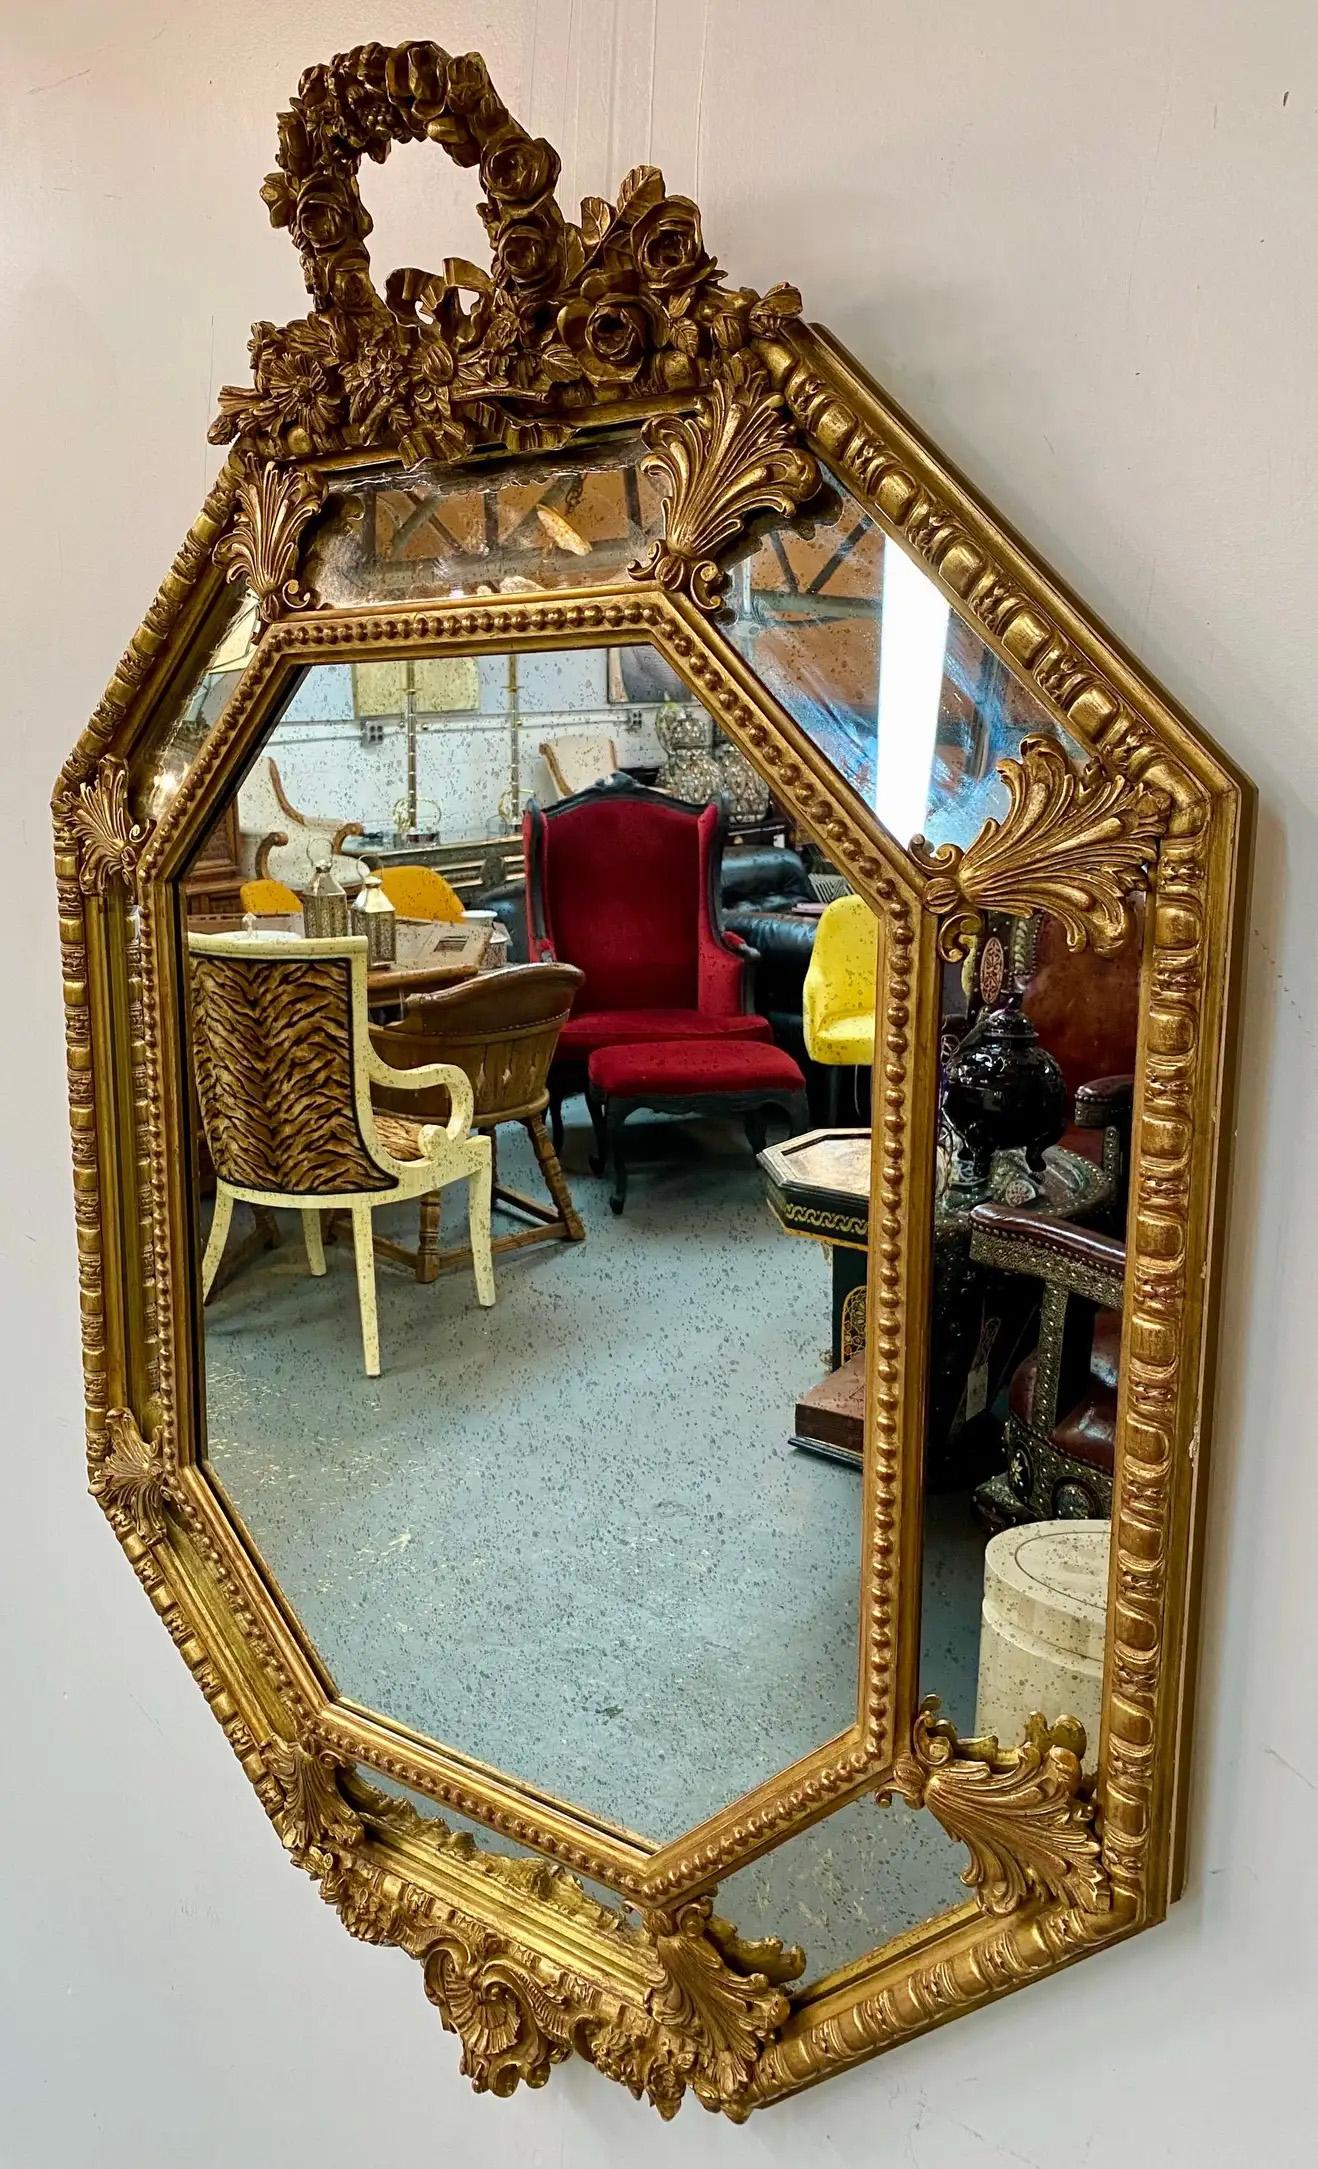 An exquisite French Regency style gilt wood mirror. The late 19th century mirror features an octagonal shape and is finely made . The crest is elaborately carved and show floral design and a bow in the middle. The frame is is embellished with